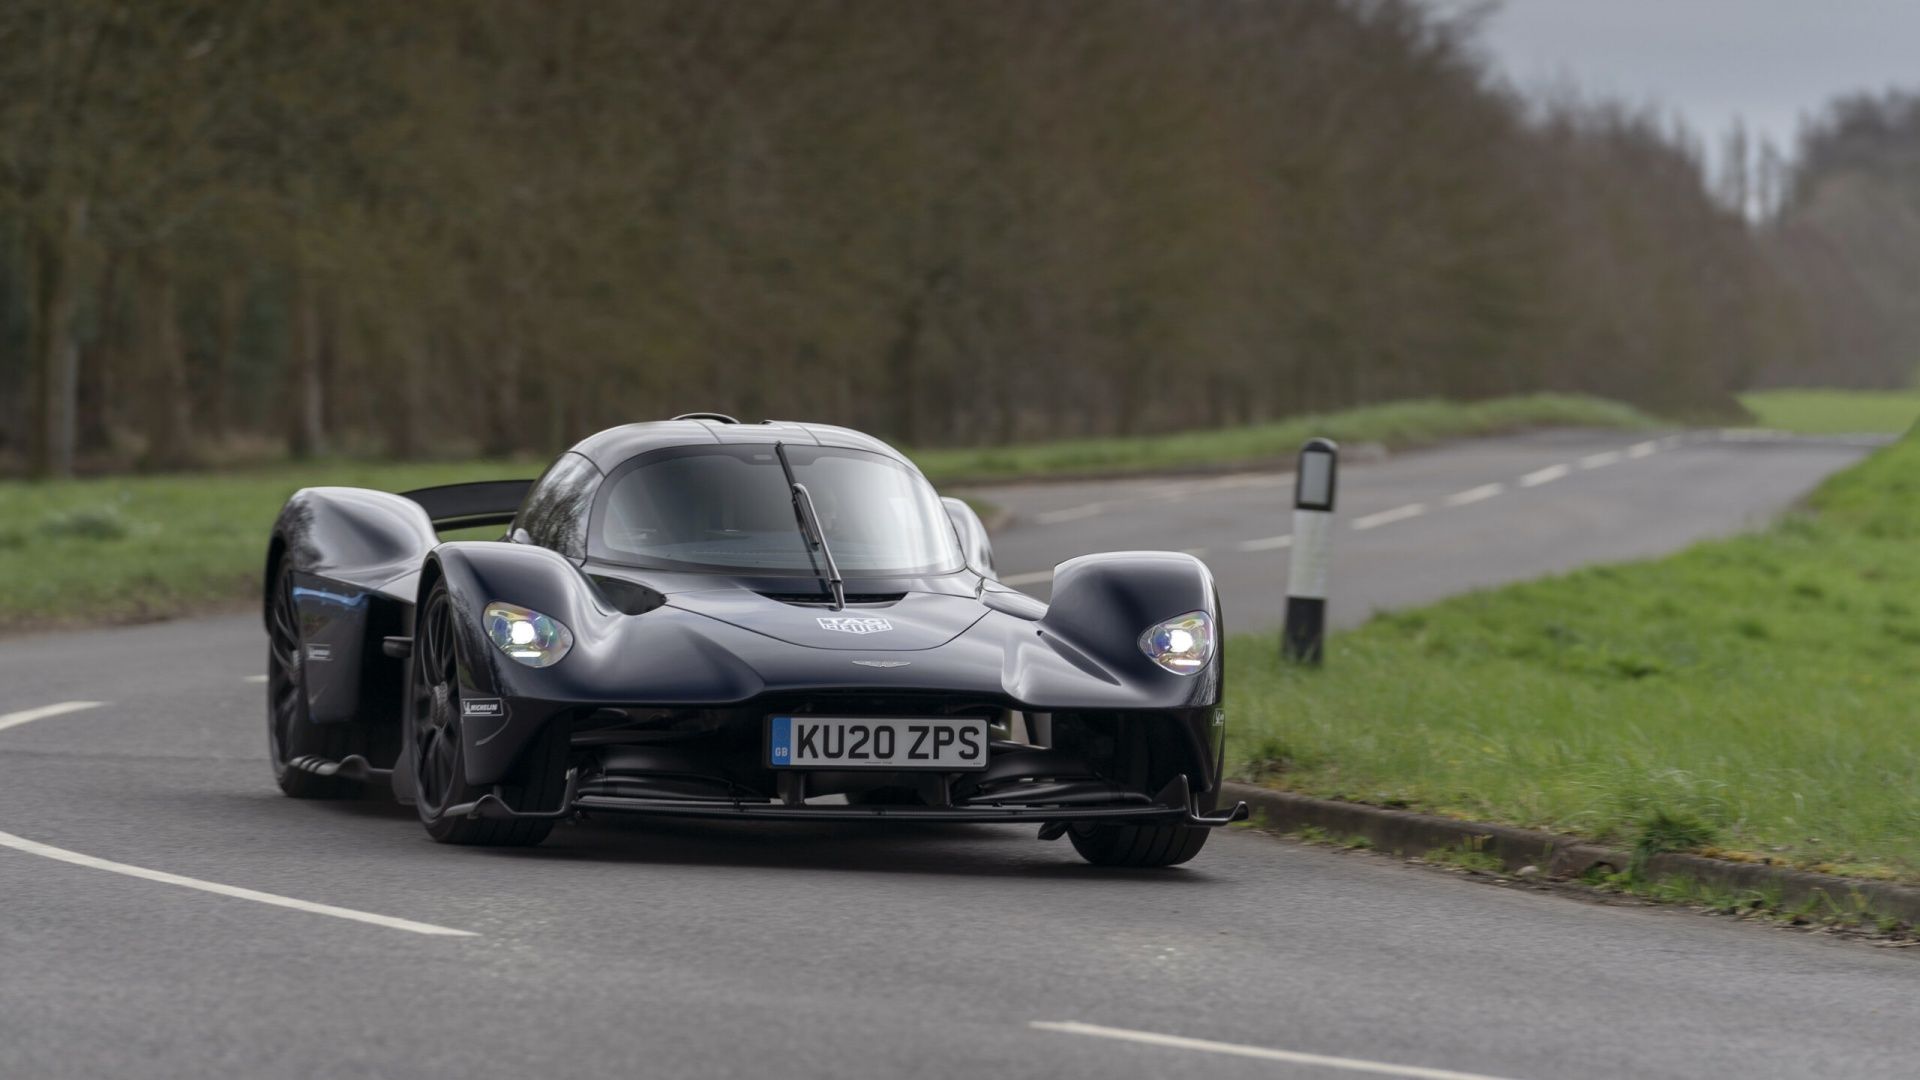 Aston Martin Valkyrie in black front end shot driving on a two lane road